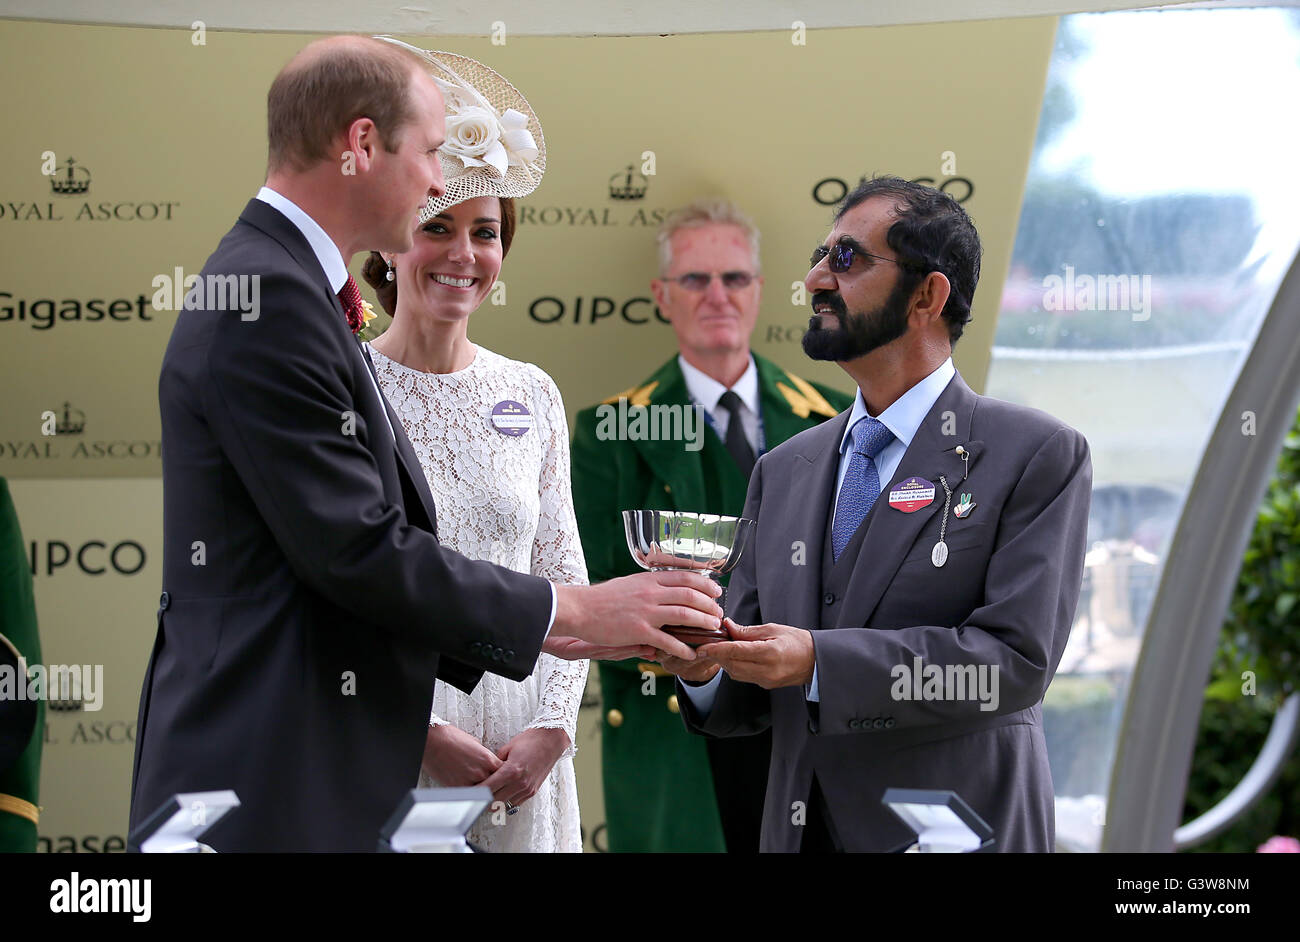 The Duke and Duchess of Cambridge present owner Mohammed bin Rashid Al Maktoum with the trophy after his horse Usherette won the Duke of Cambridge Stakes during day two of Royal Ascot 2016, at Ascot Racecourse. Stock Photo